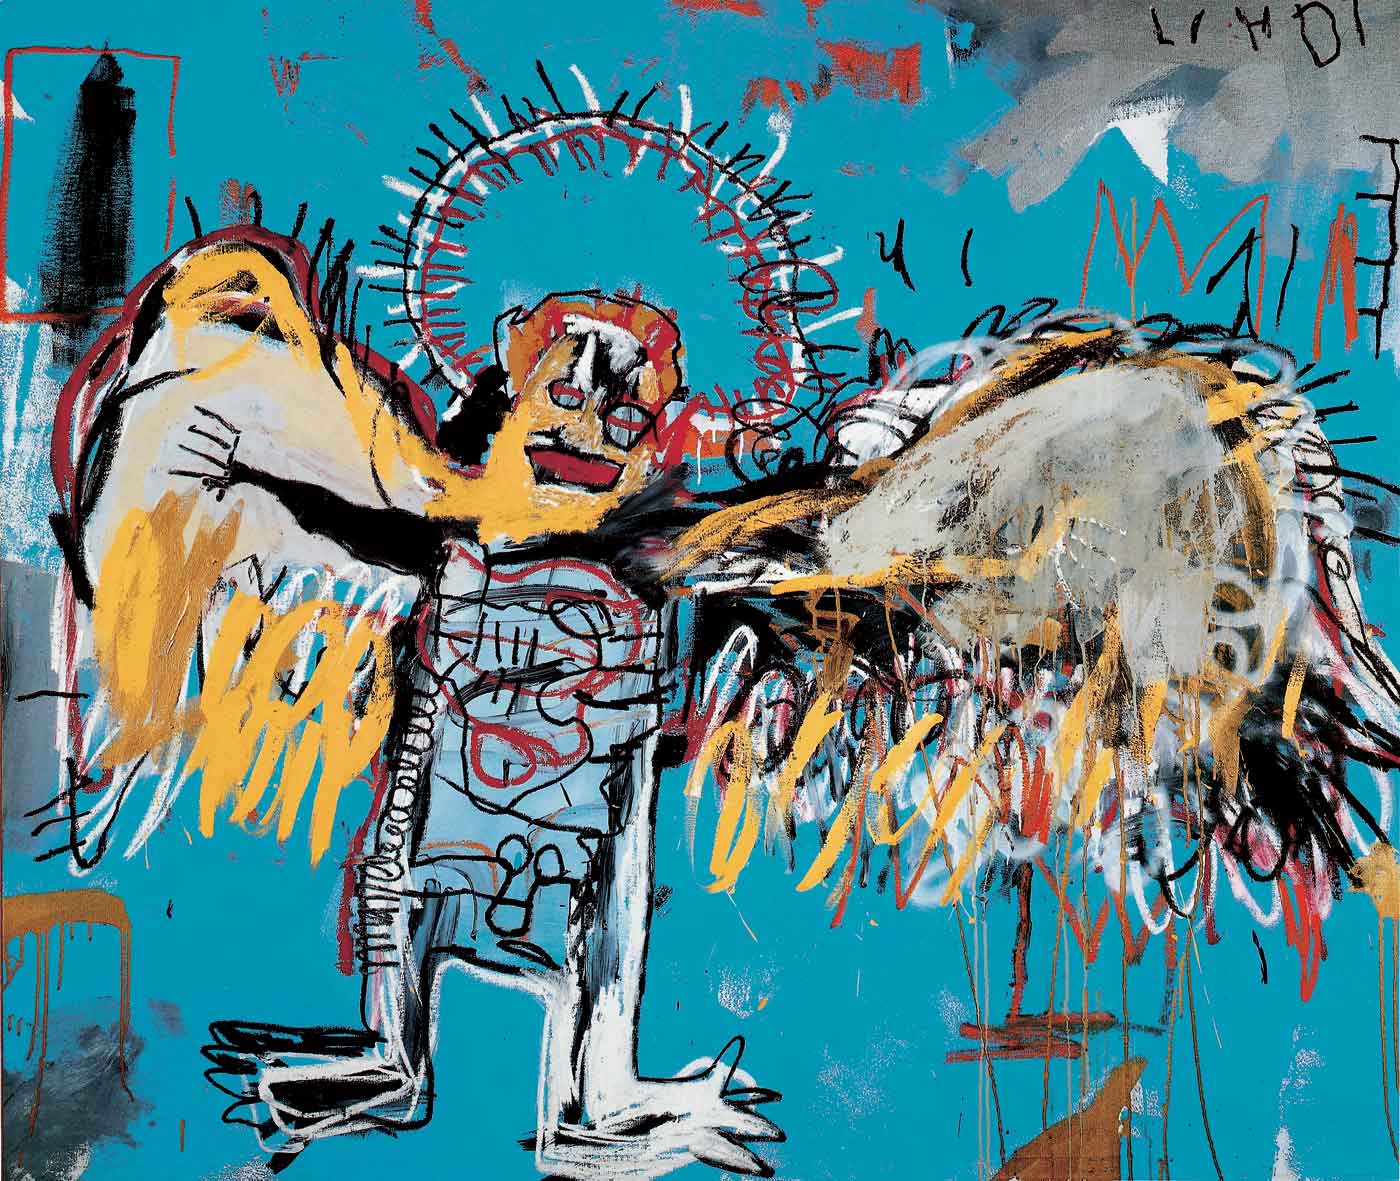 Untitled (Fallen Angel) by Jean-Michel Basquiat - 1981 - 66 x 78 in. private collection